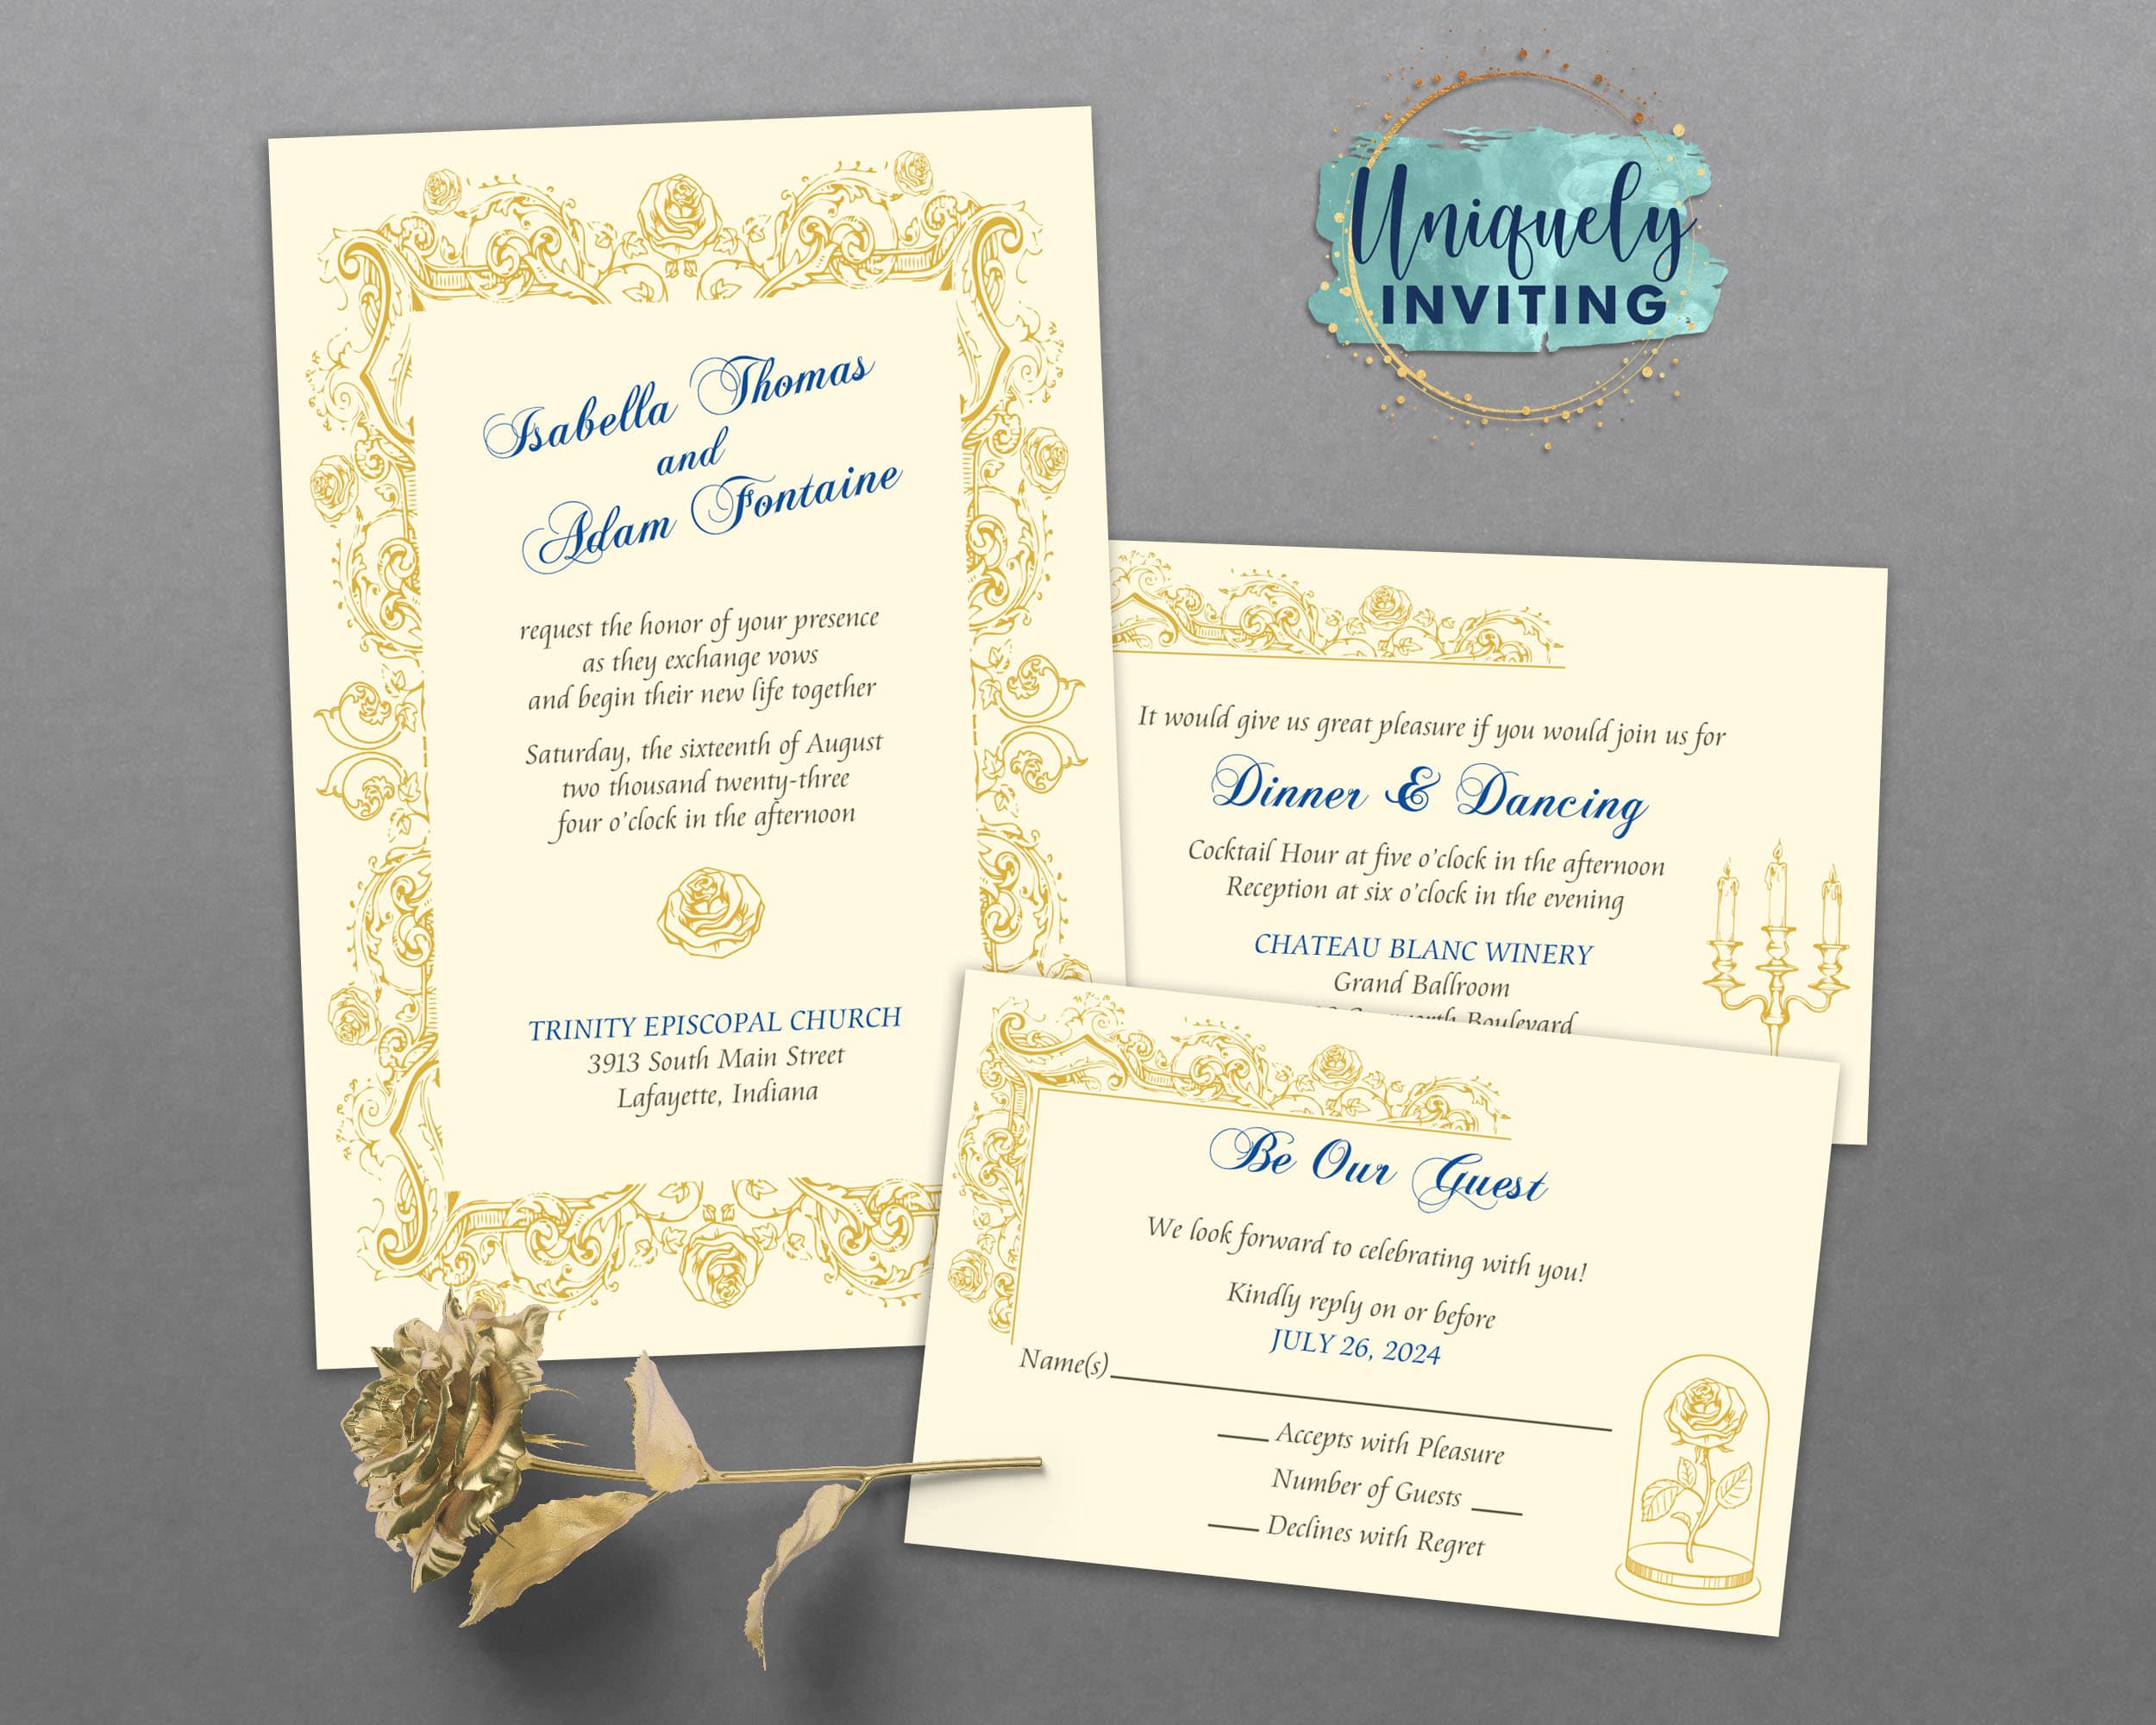 be-our-guest-invitations-uniquely-inviting